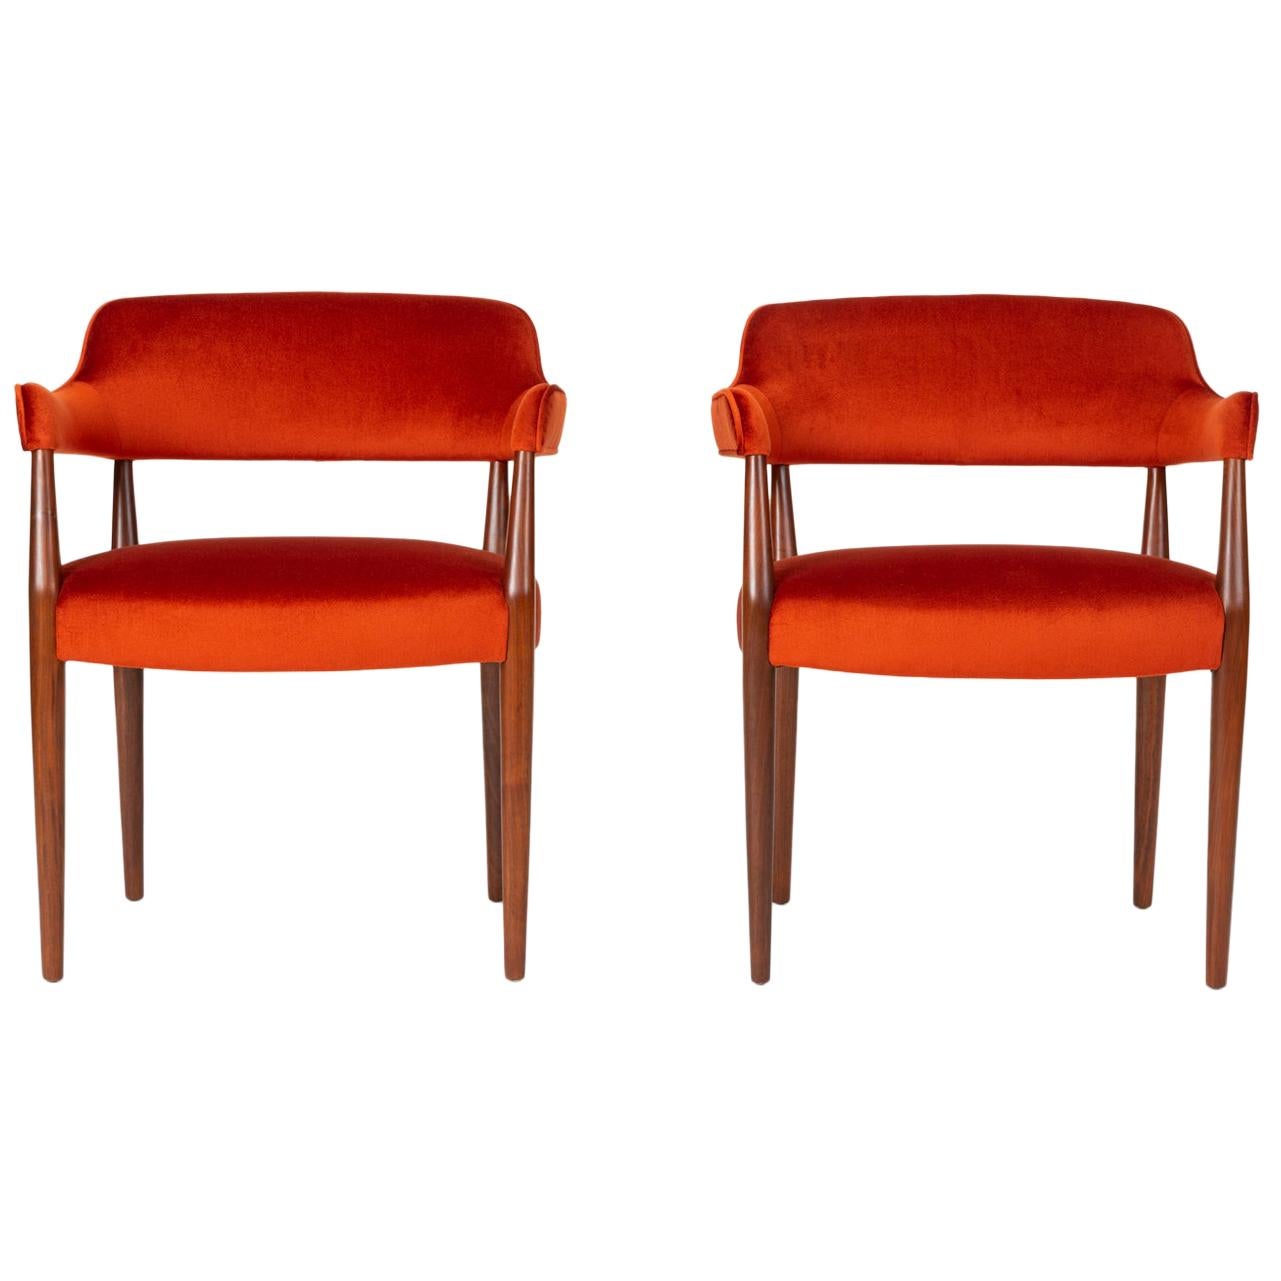 Pair of American-Made Armchairs by J.G. Furniture Company